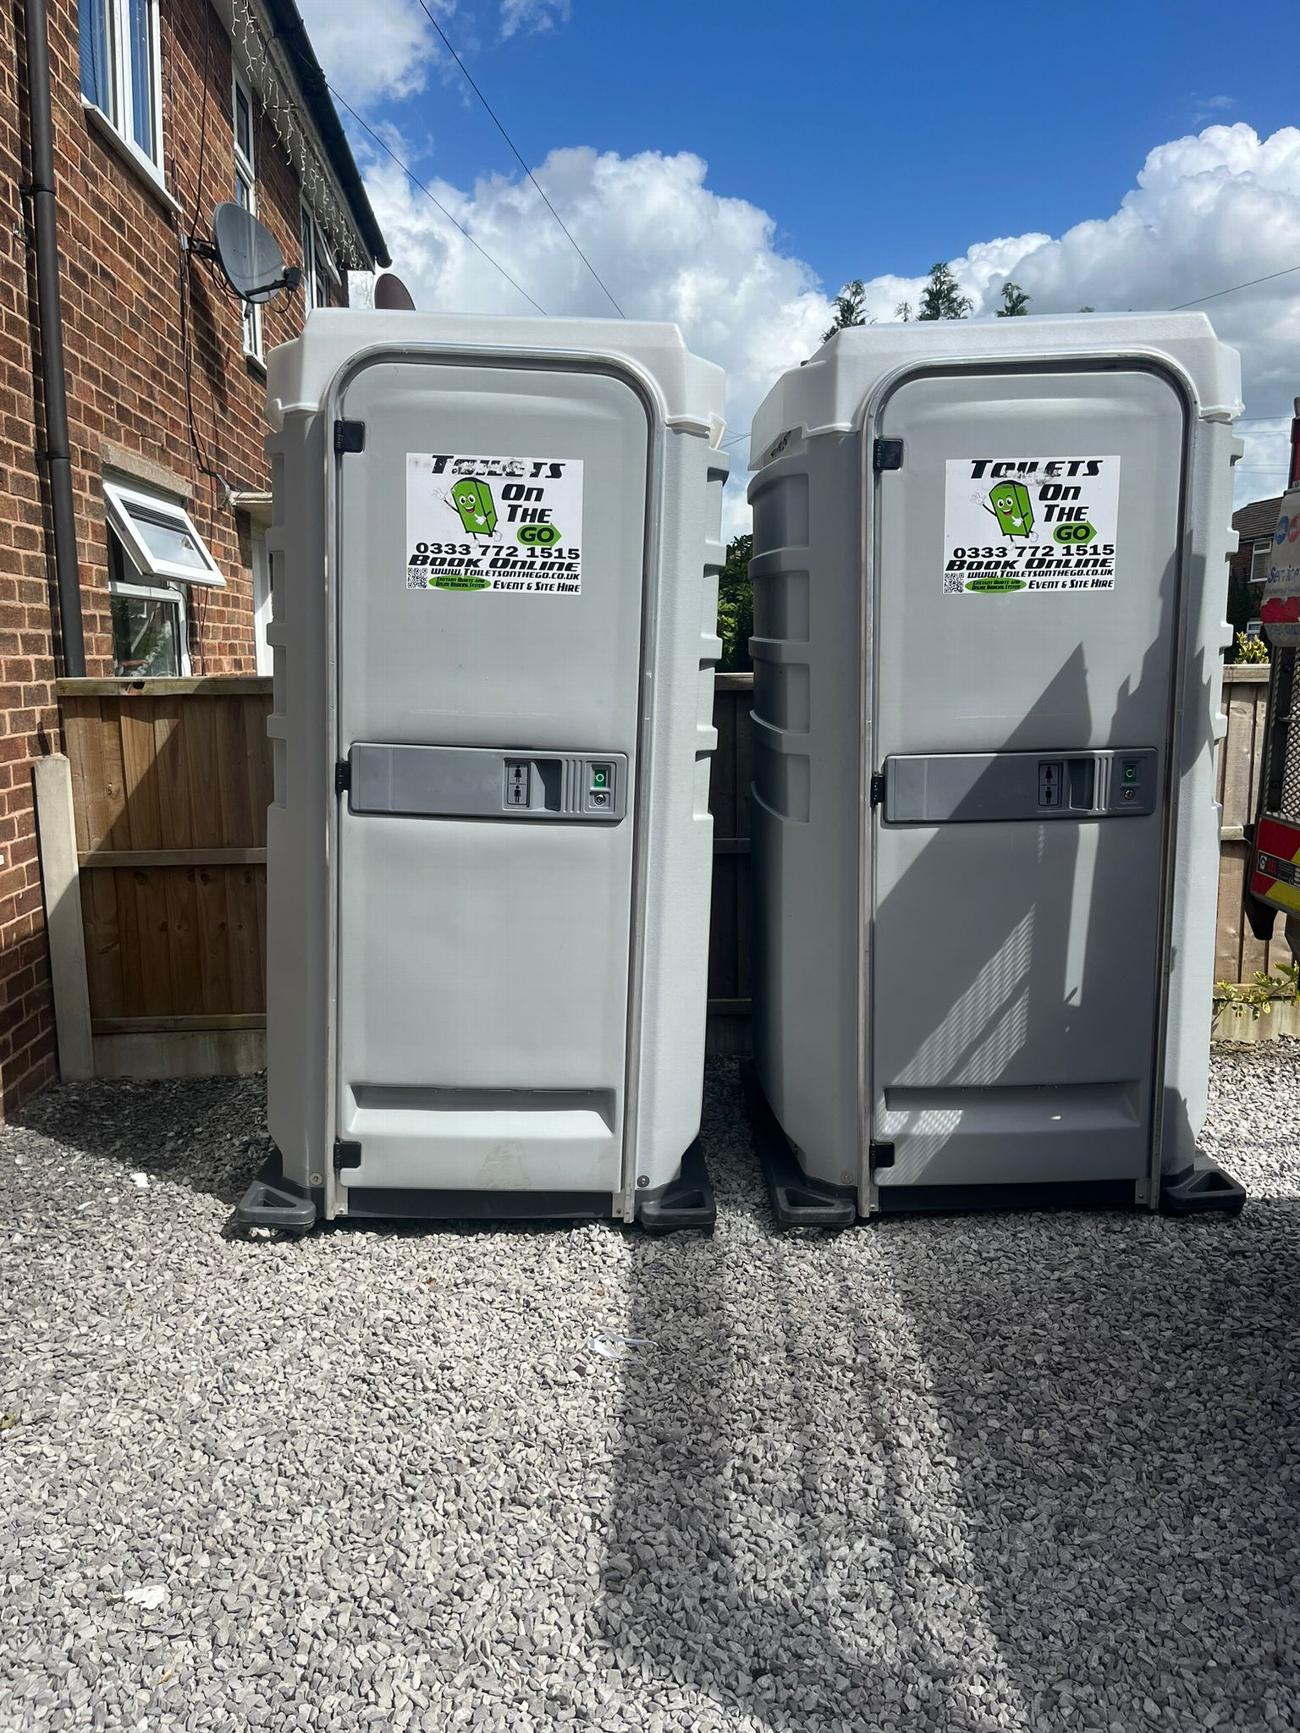 Gallery | Portable Toilet Loo Hire Rental Company in North West uk and Manchester gallery image 66